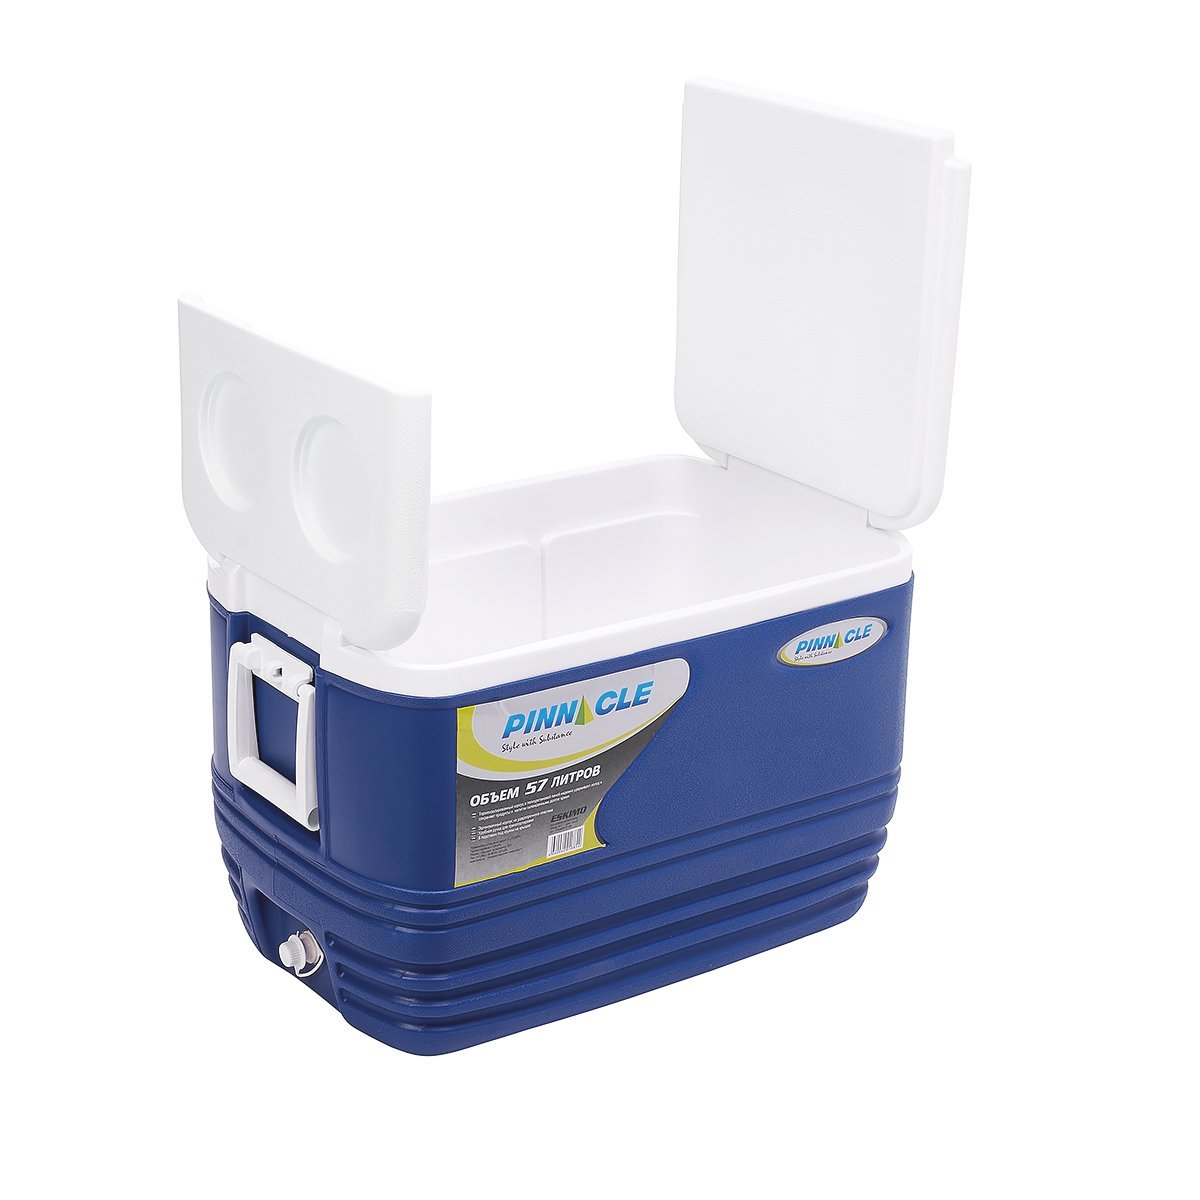 Eskimo Large Ice Chest with Side Handle, Drain Plug and 6 Cup Holders, 60 qt with a lid widely open